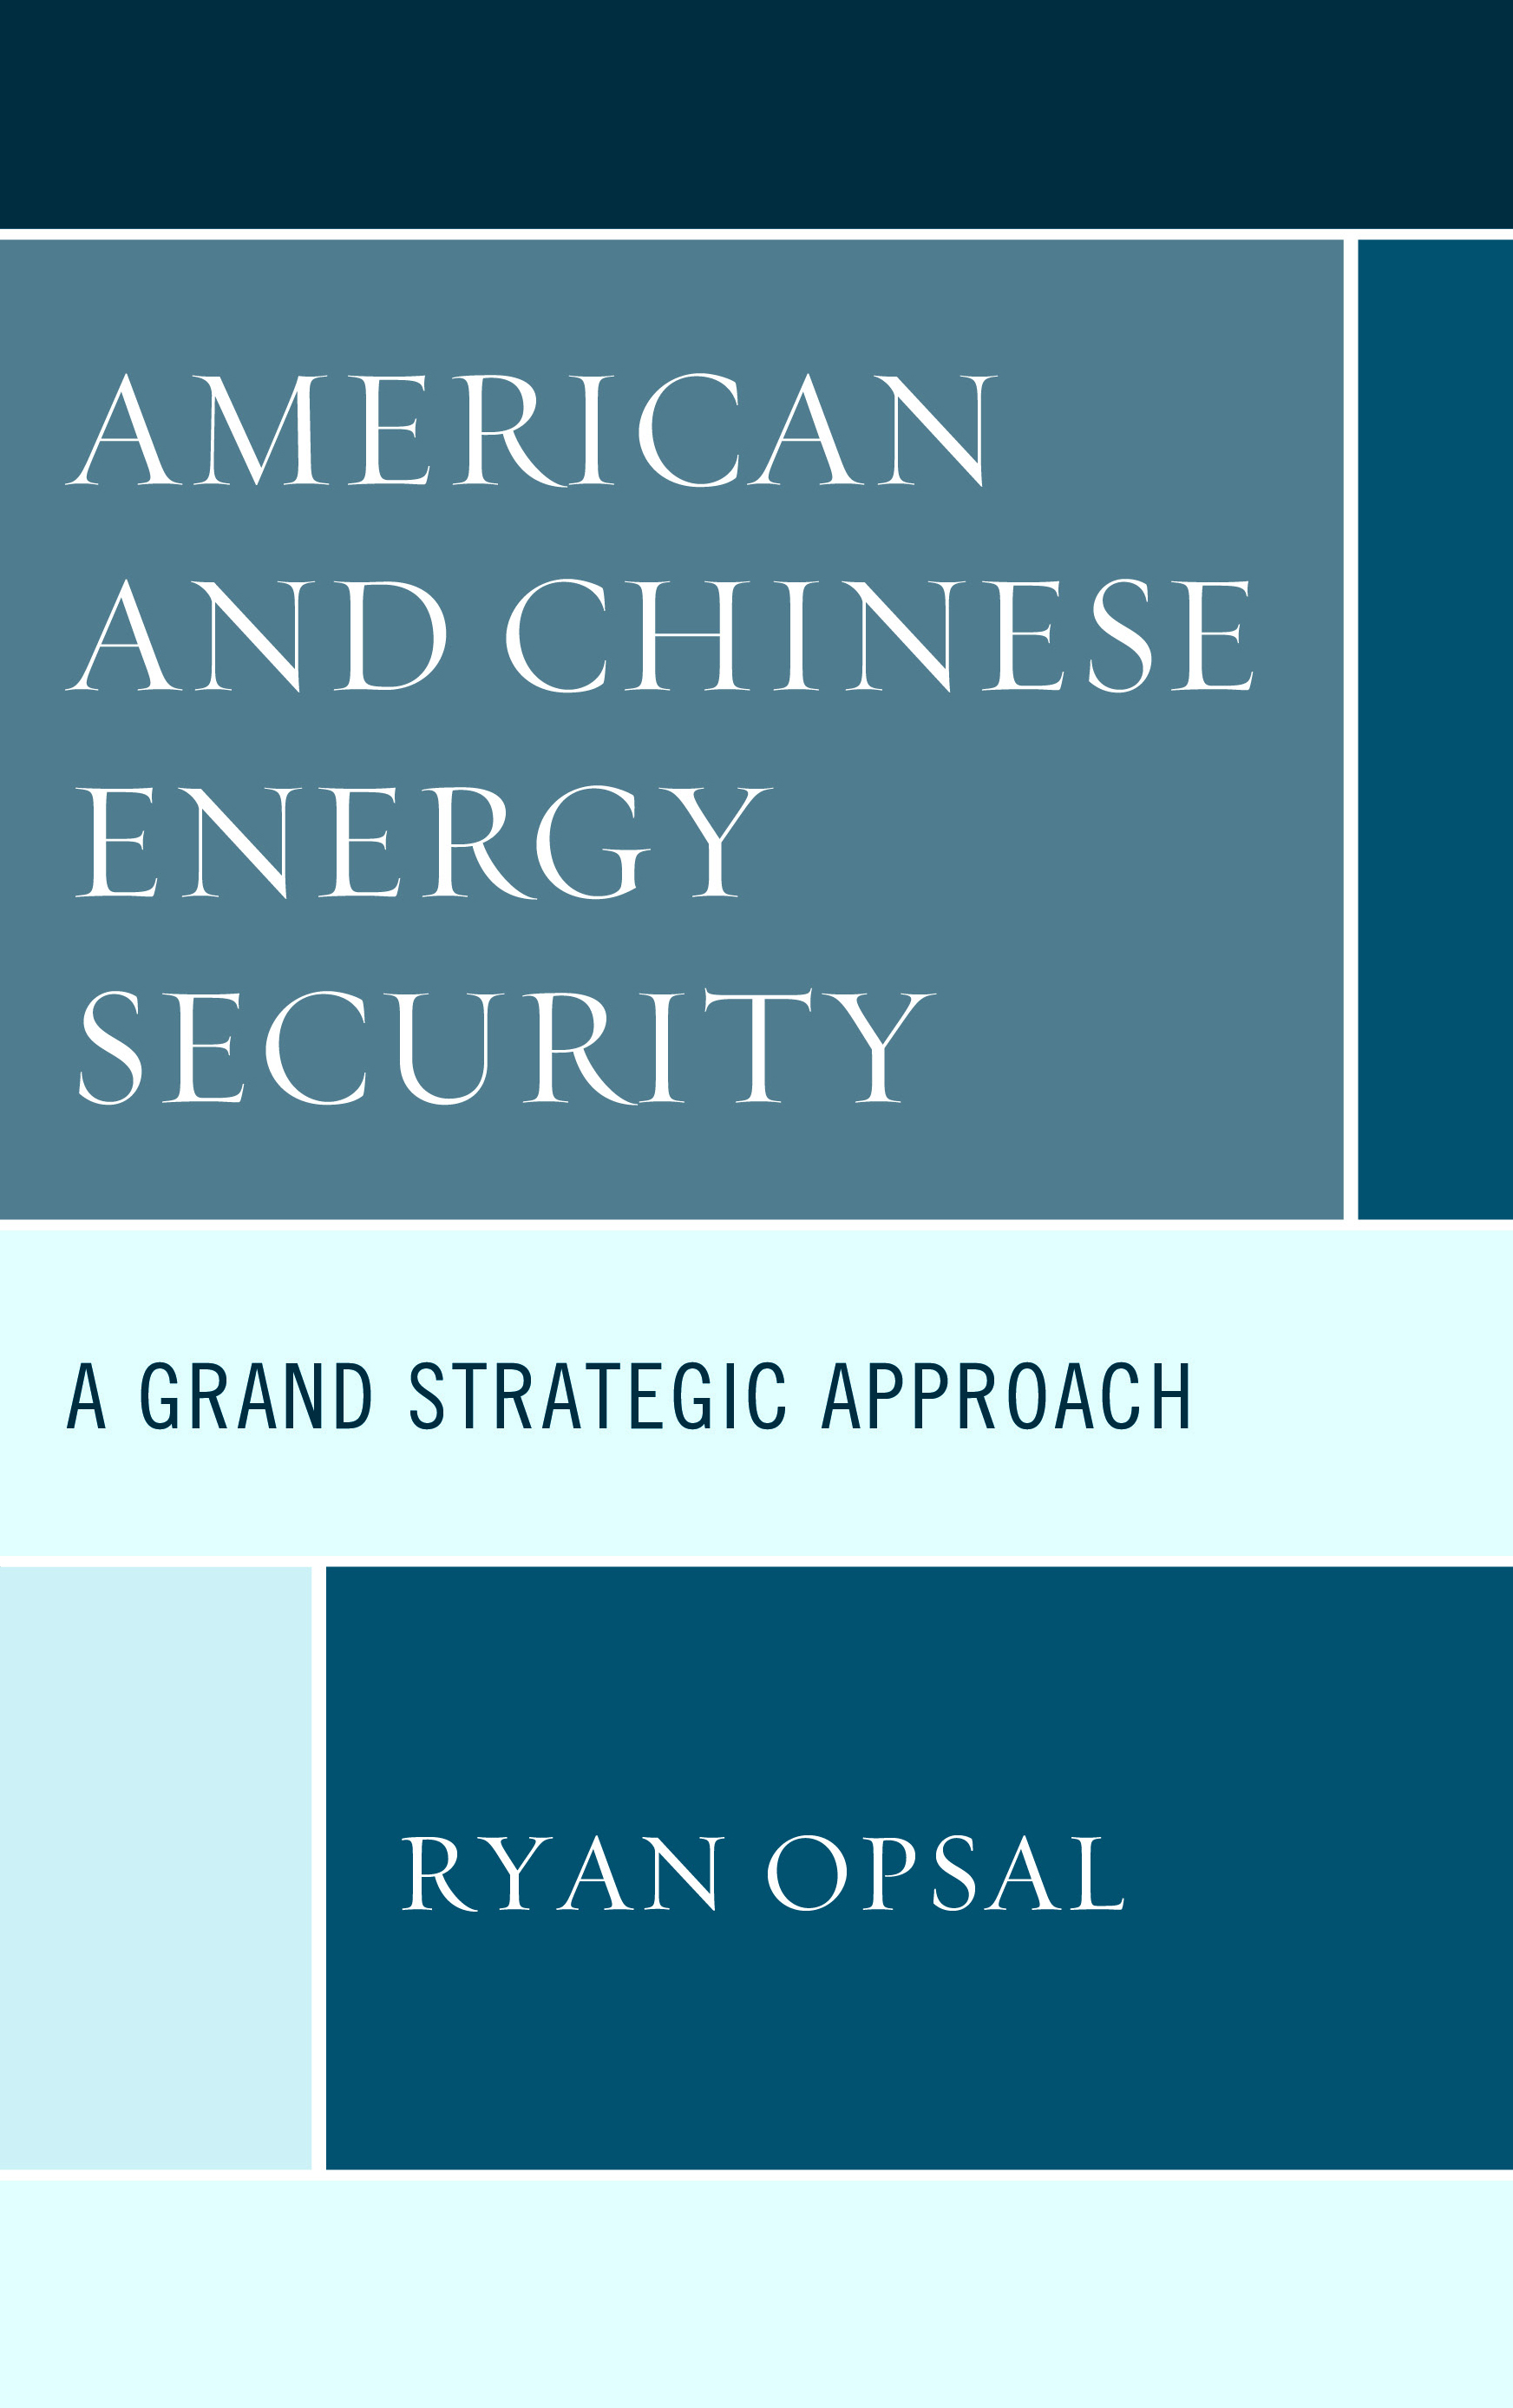 American and Chinese Energy Security: A Grand Strategic Approach